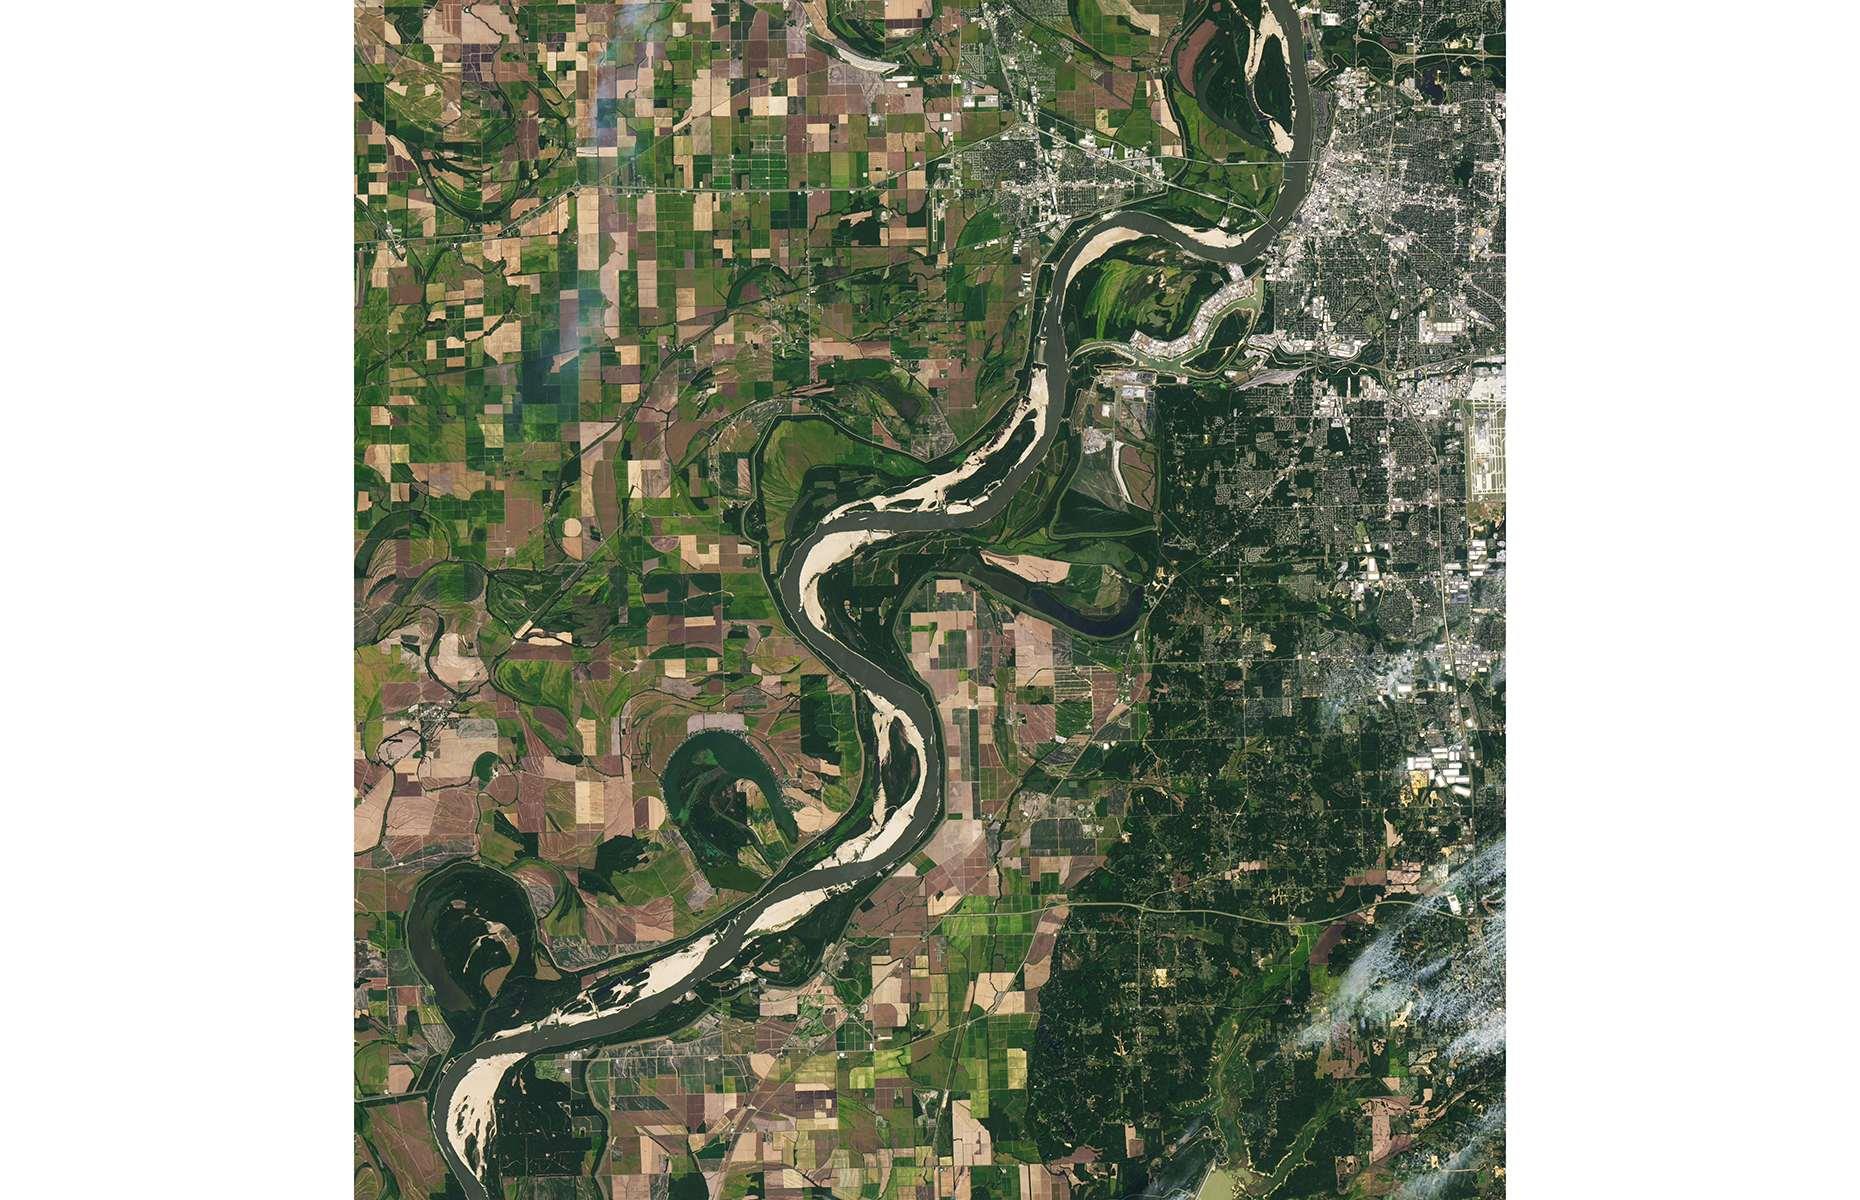 <p>Temperatures in summer 2023 were 1.2°C (2.1°F) warmer than average worldwide, with the rampaging heat leaving the Mississippi gasping with thirst. The river’s waning levels hampered barge traffic and threatened drinking water supplies across Louisiana. Tennessee was affected too – this image shows a diminished Mississippi River near Memphis on 16 September 2023, where the waterline was so sunken in places that the riverbed was exposed, echoing the historic lows of 2022. Climate change is also causing harmful algal blooms to form in sections of the river system, as well as damage to its wetlands from stronger hurricanes.</p>